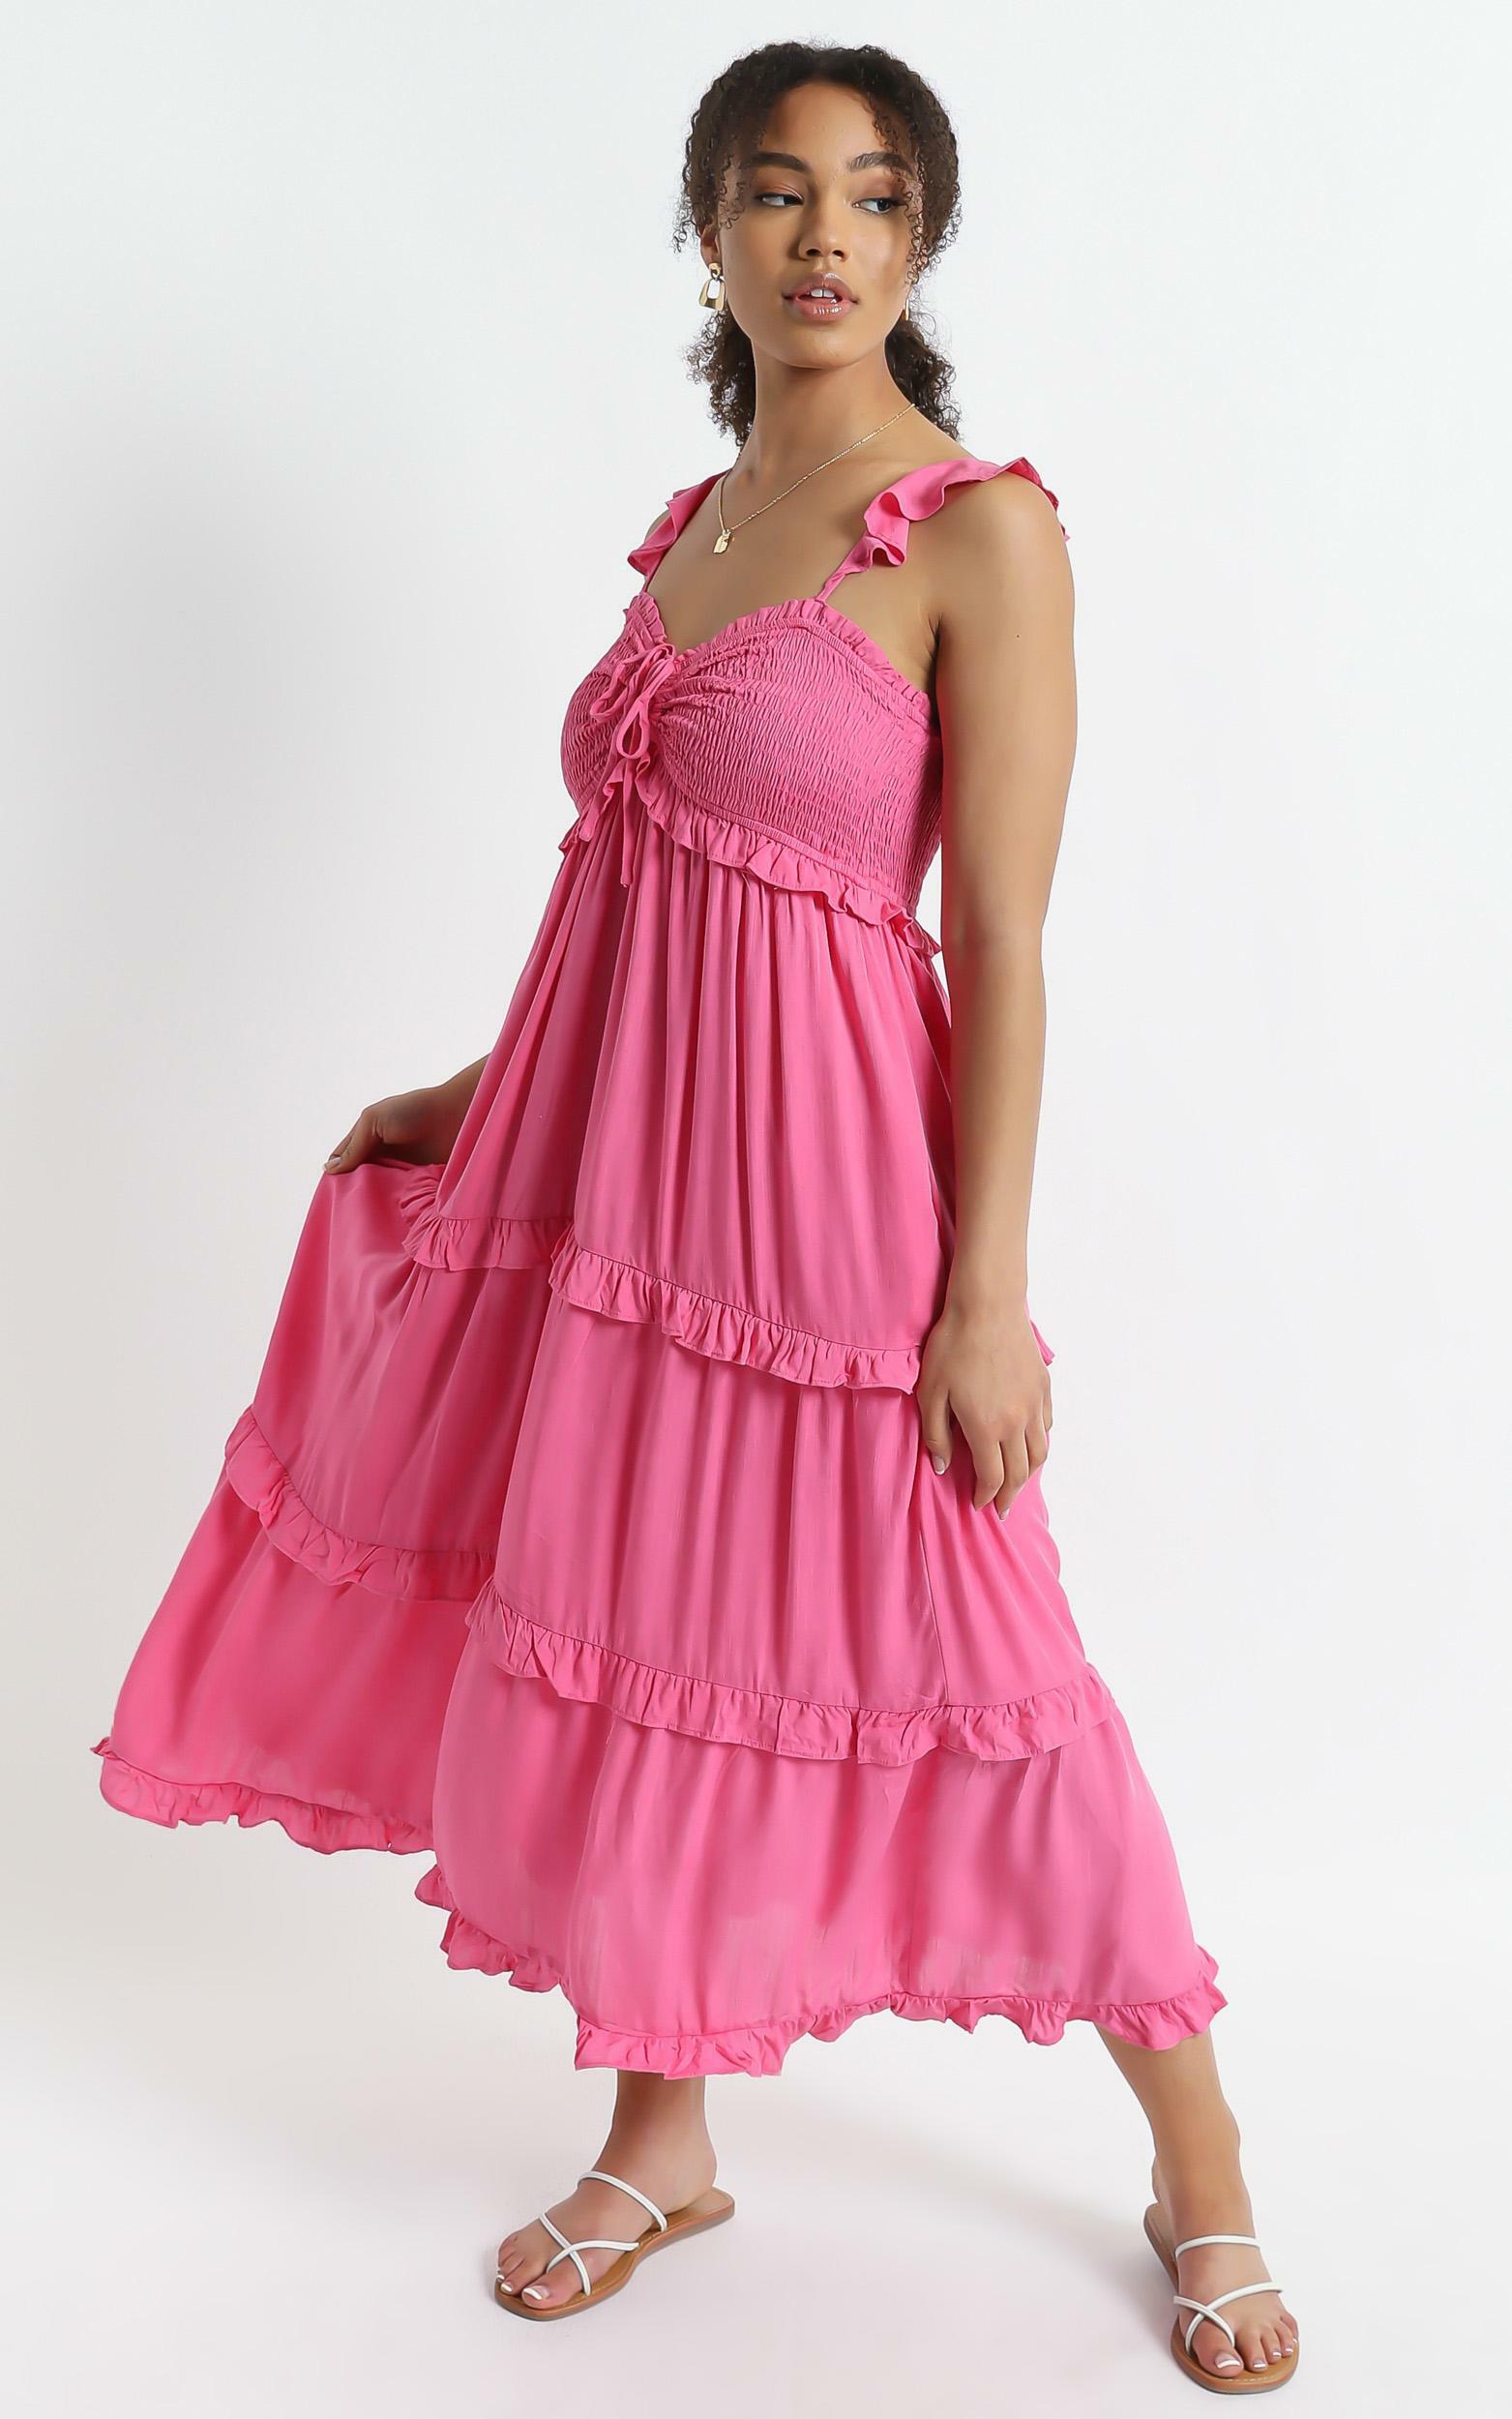 Good For The Soul Dress in Pink - 06, PNK3, hi-res image number null